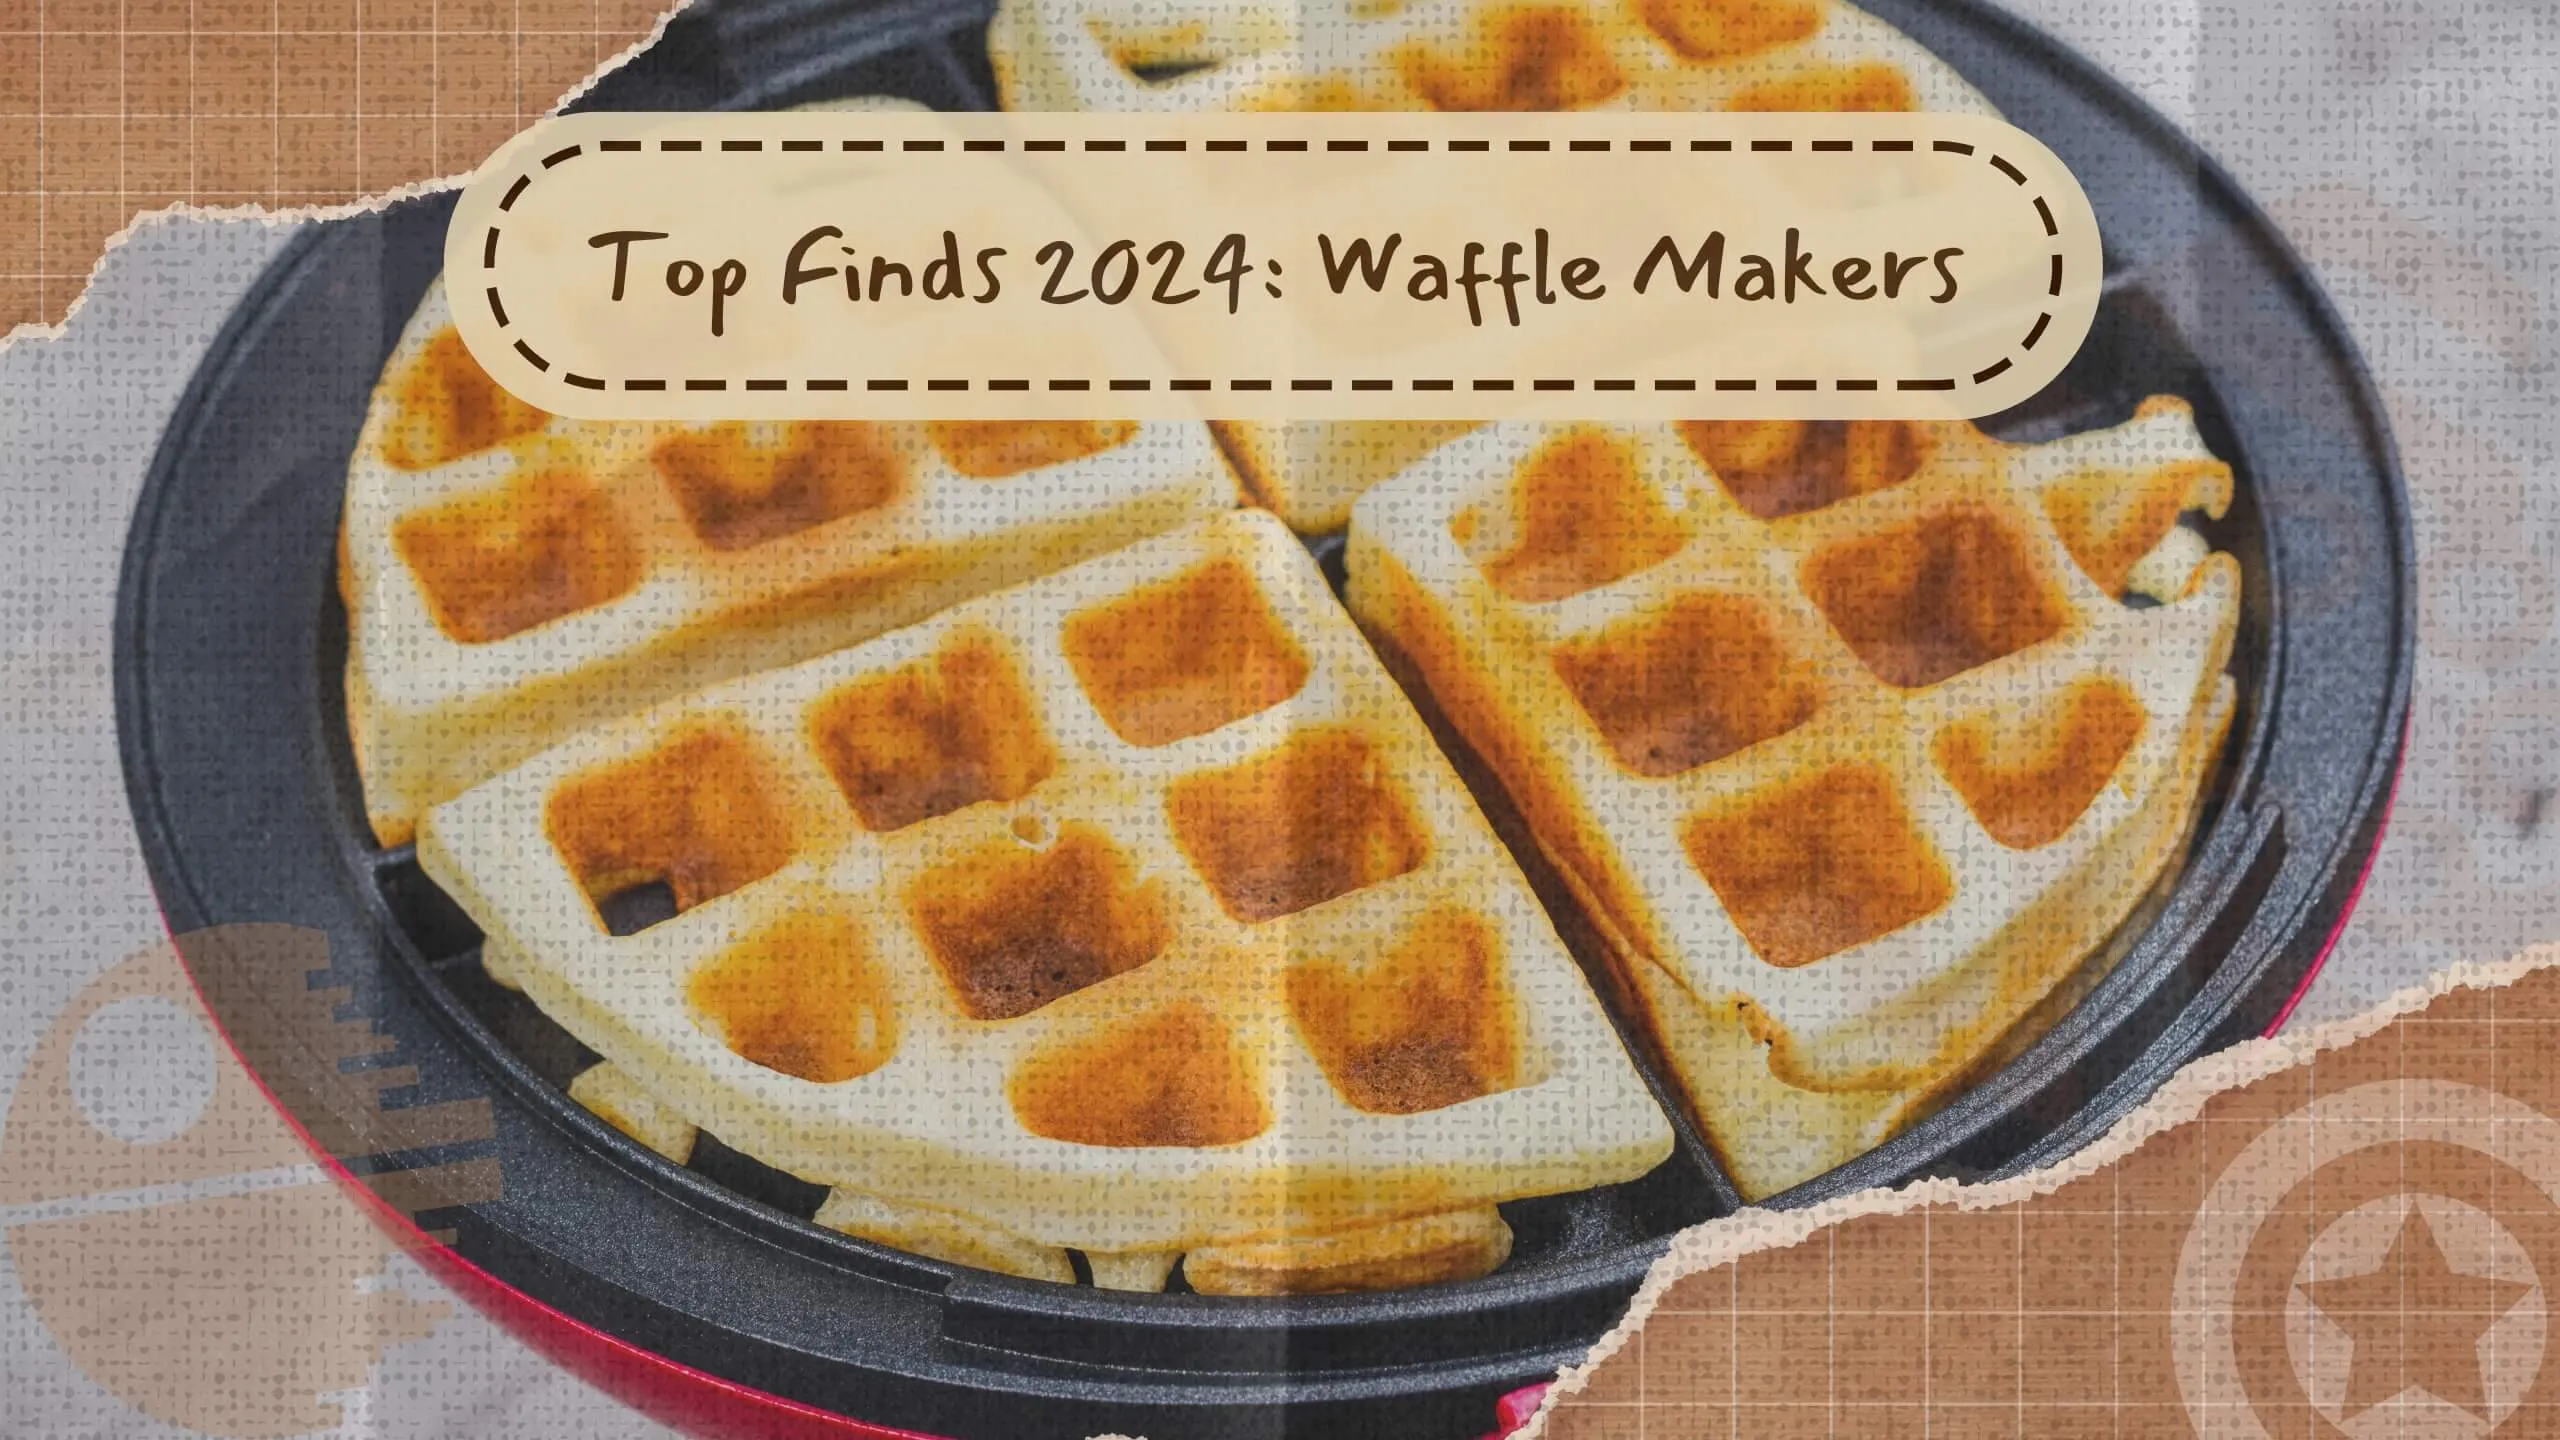 Waffle makers teaser